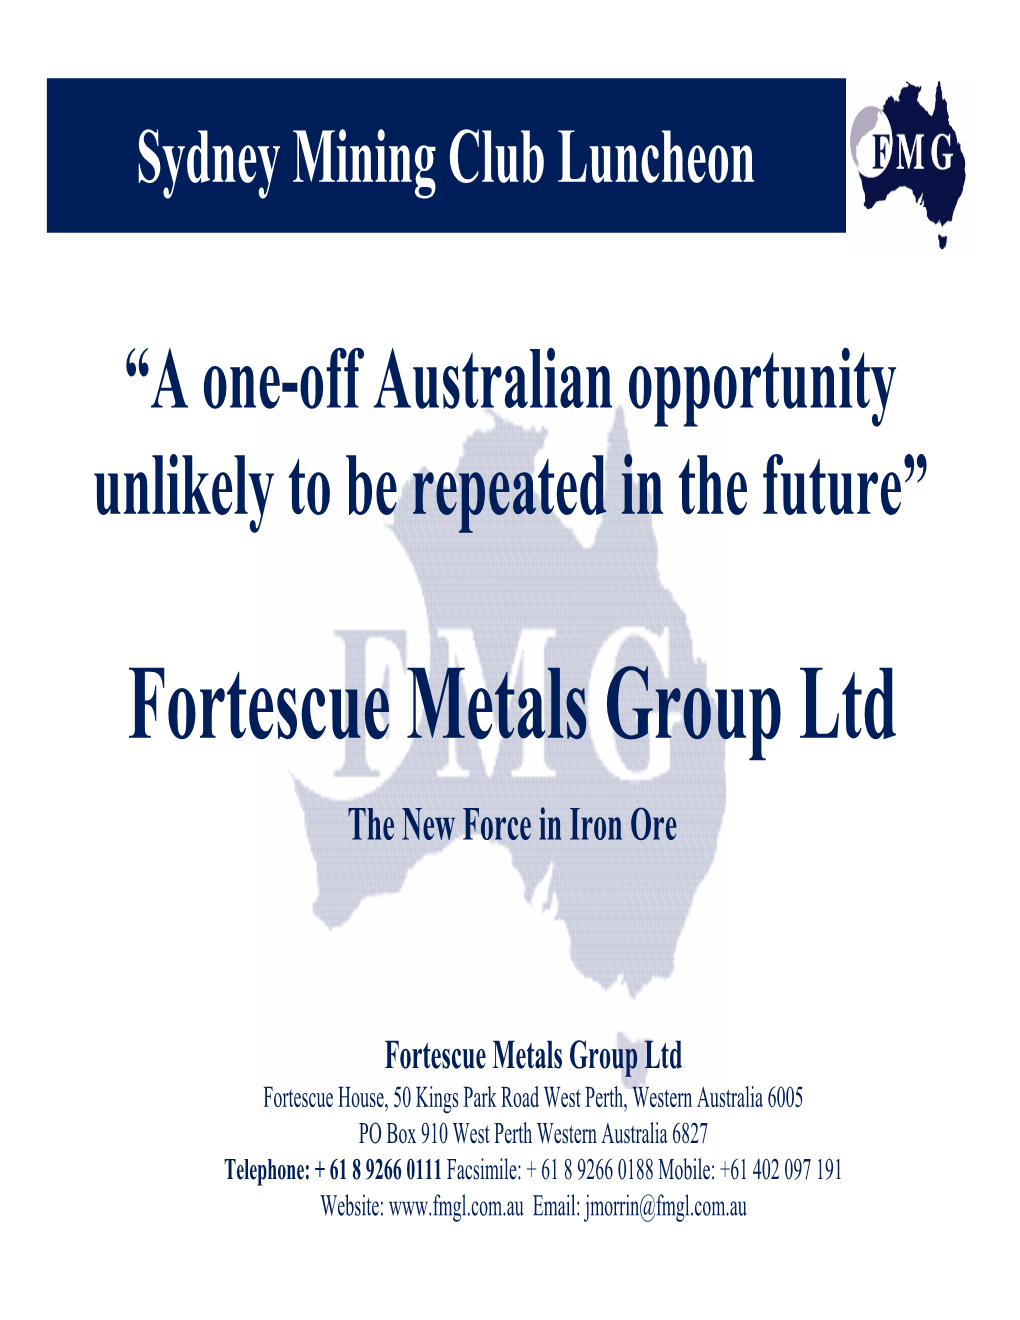 Fortescue Metals Group Ltd the New Force in Iron Ore